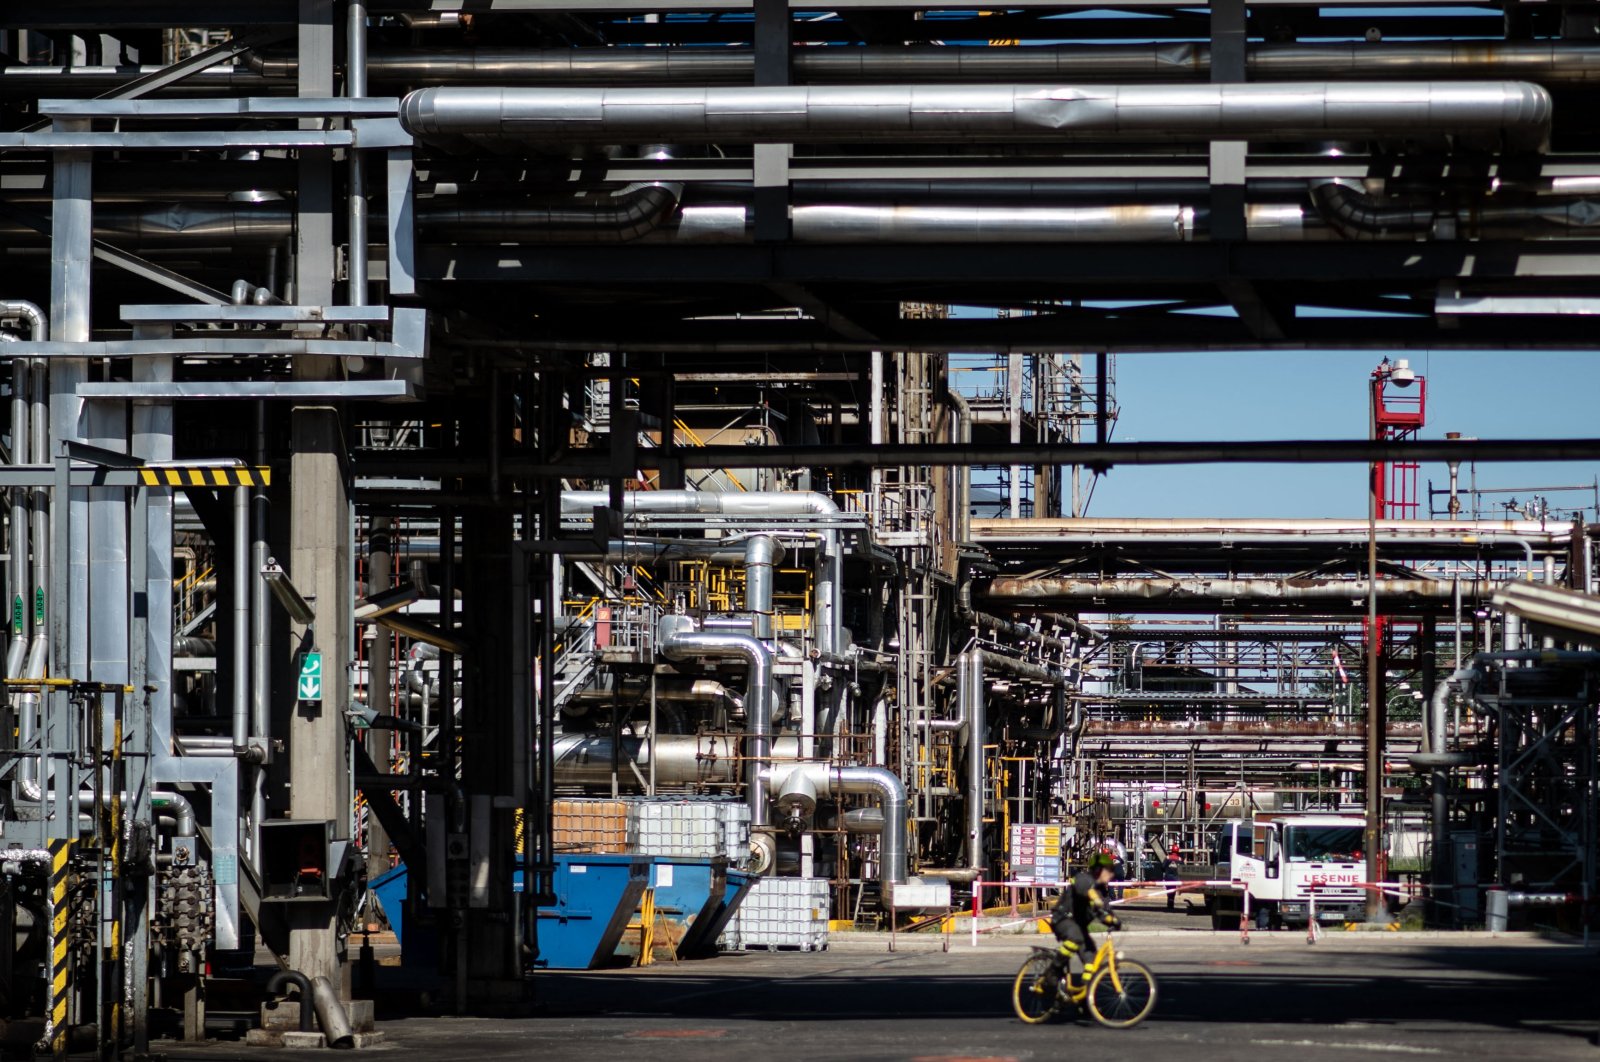 A worker rides a bike at the facilities of Slovak refinery Slovnaft in Bratislava, Slovakia, May 19, 2022. (AFP Photo)